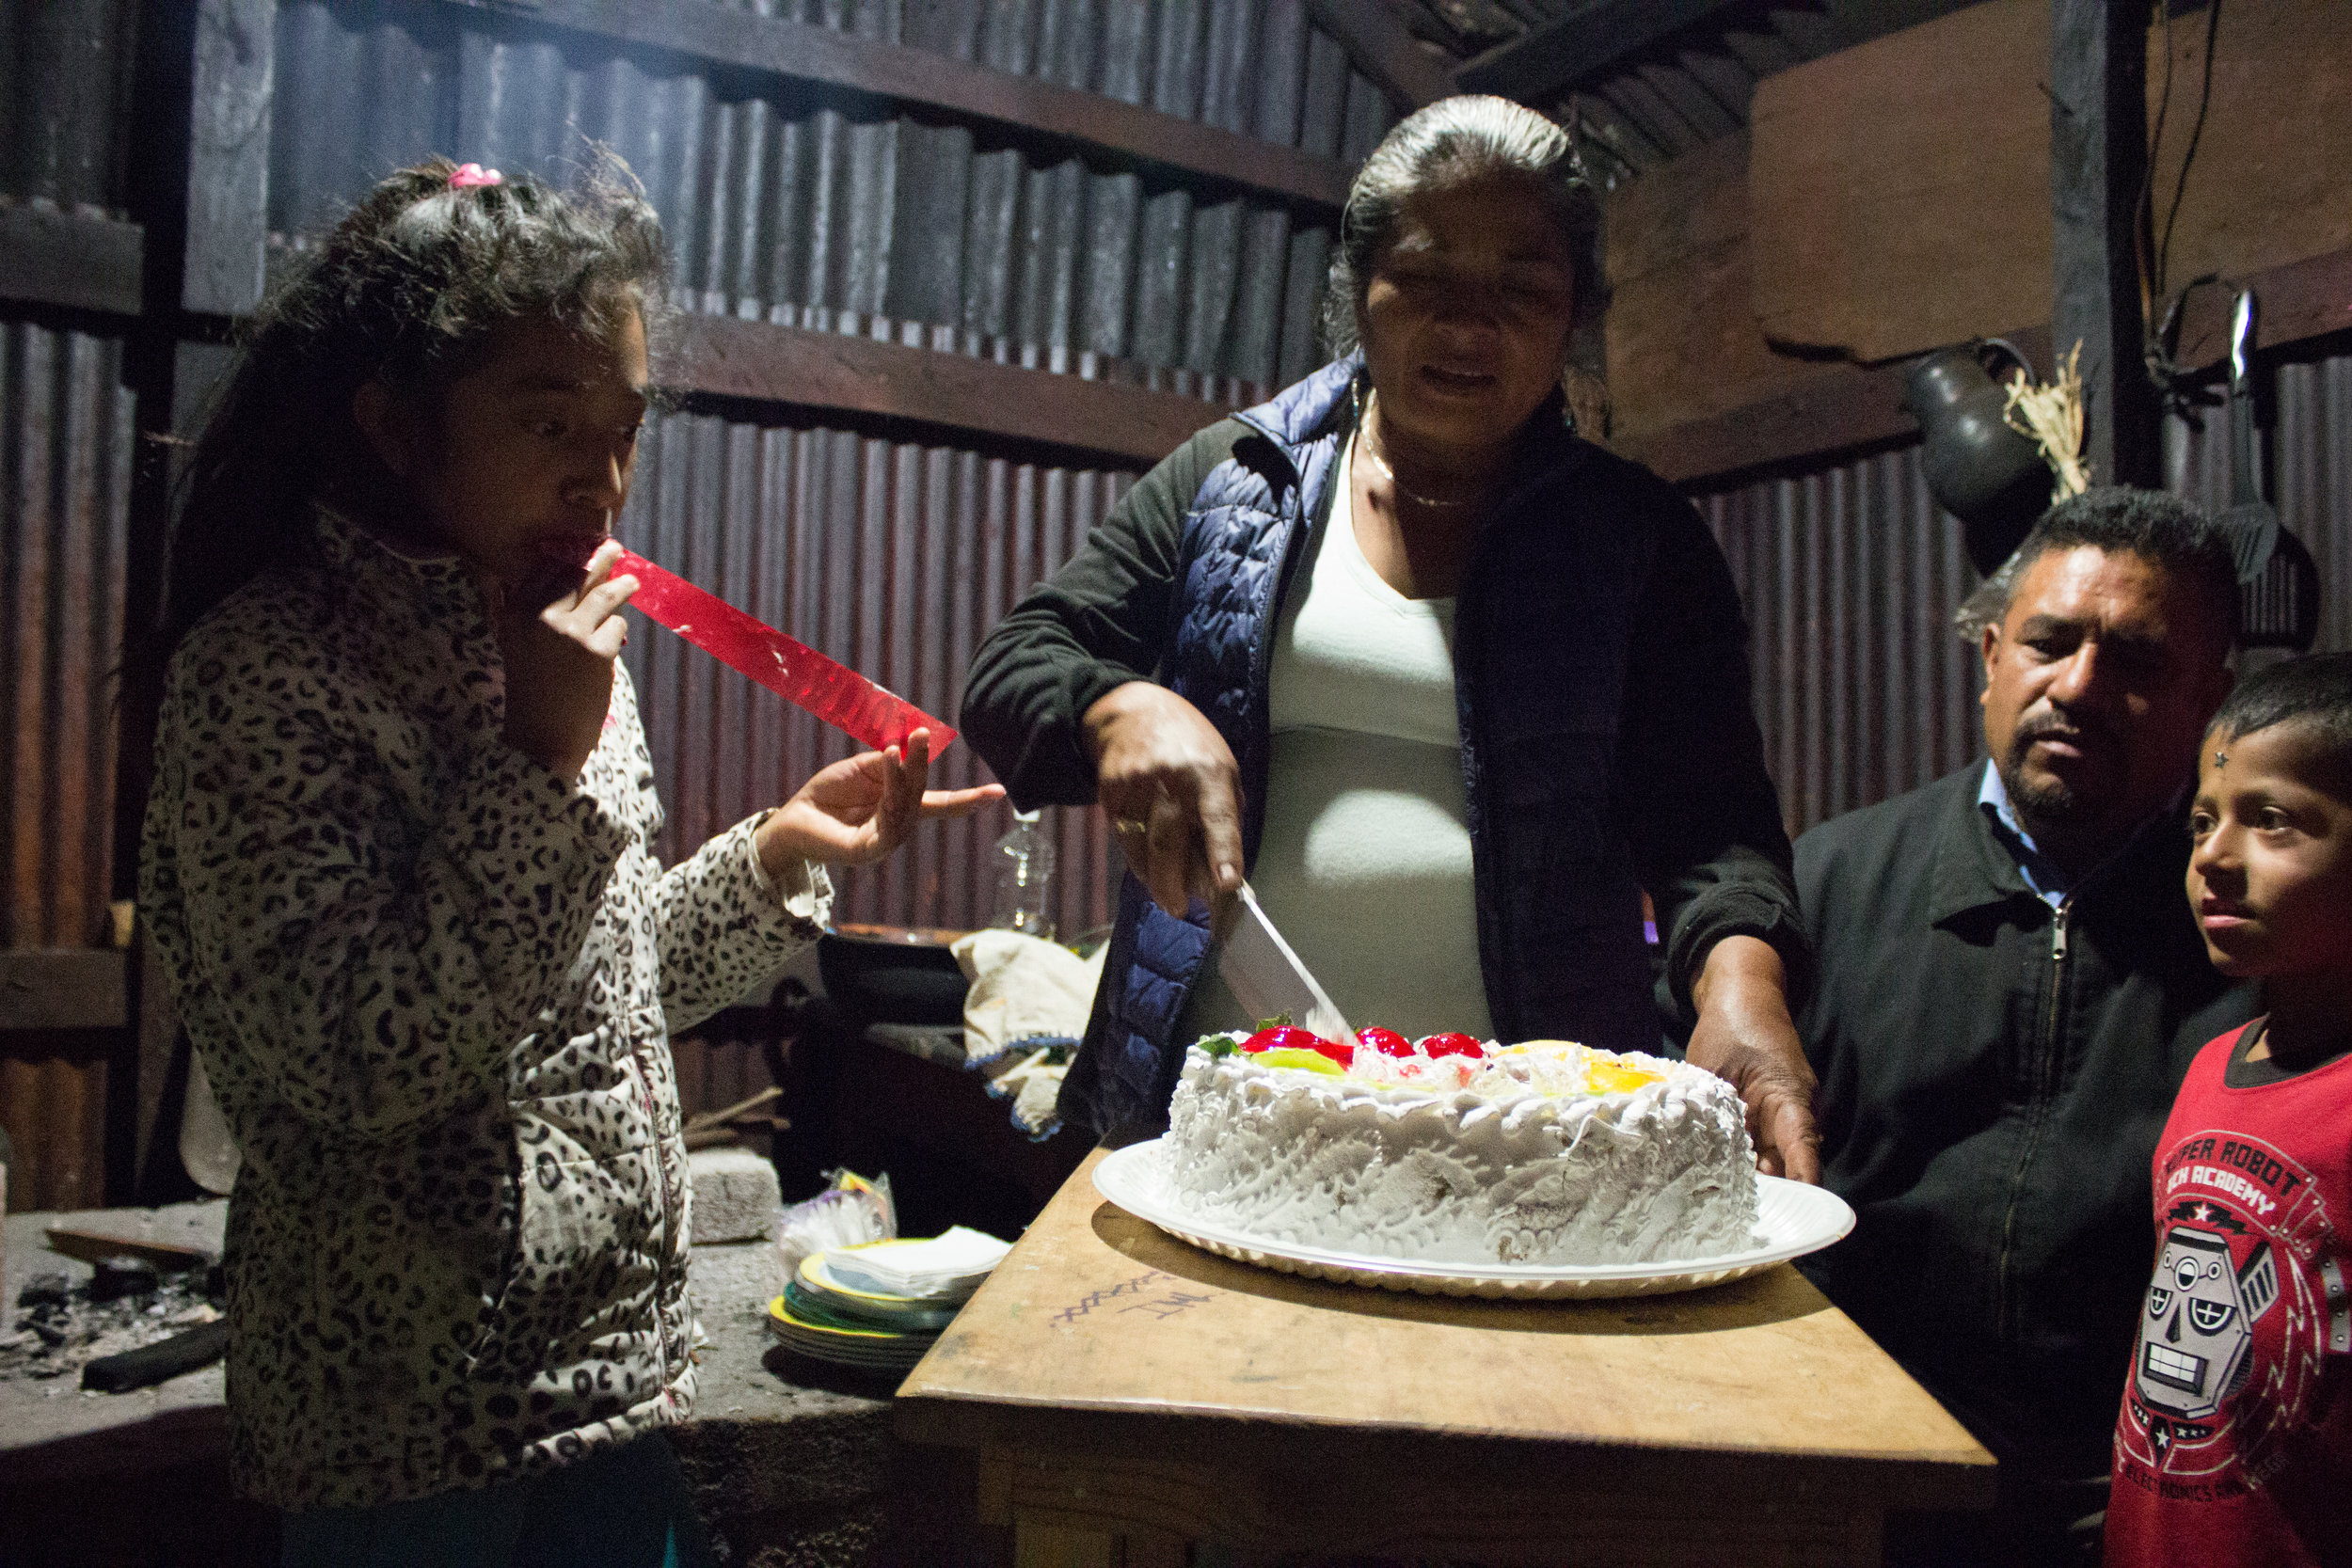  A birthday cake is served in Bernardita’s kitchen for one of her daughters. It’s our last night in Chapultepec. 